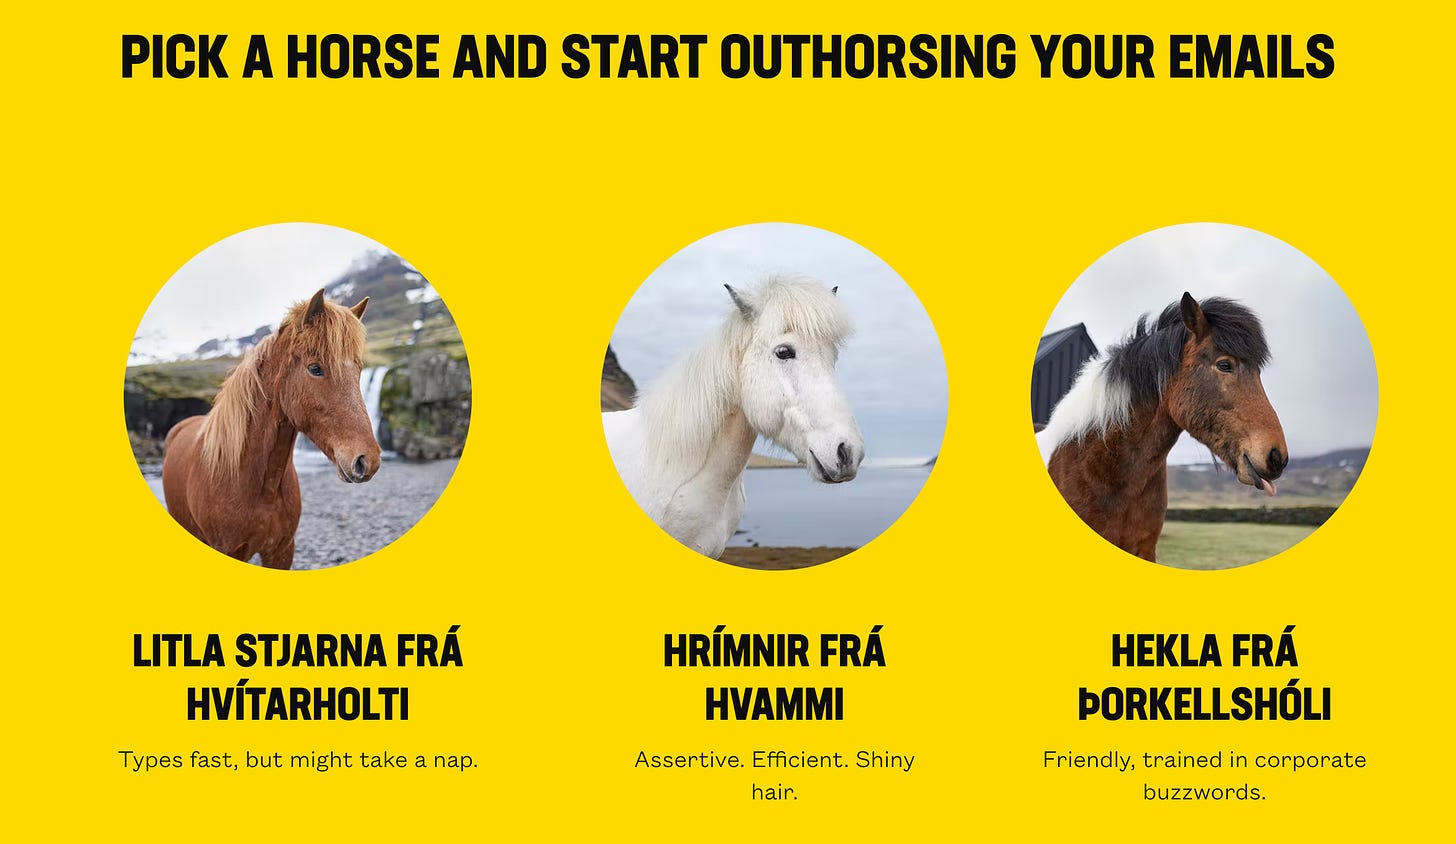 3 photos of horses, each with a name and specialty skill